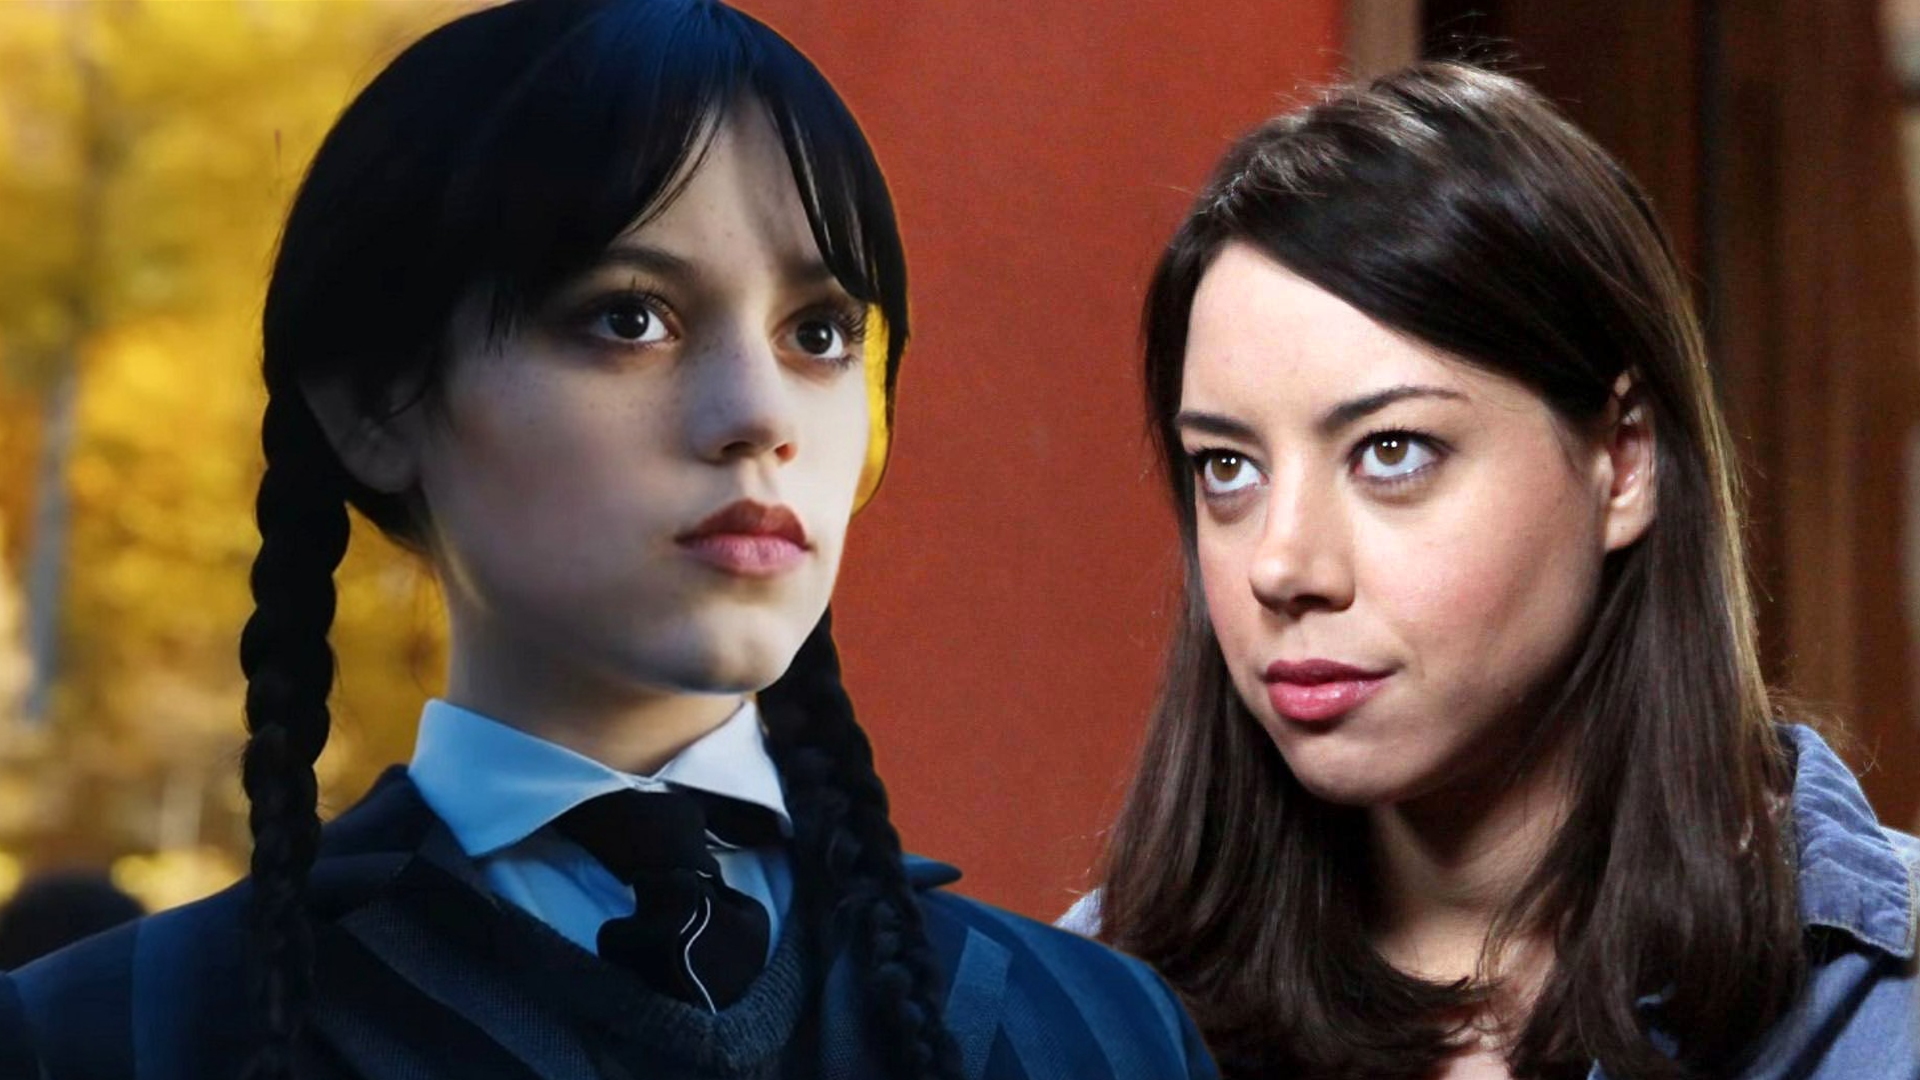 Fans Are Spiraling Over Jenna Ortega and Aubrey Plaza's Chemistry on Stage